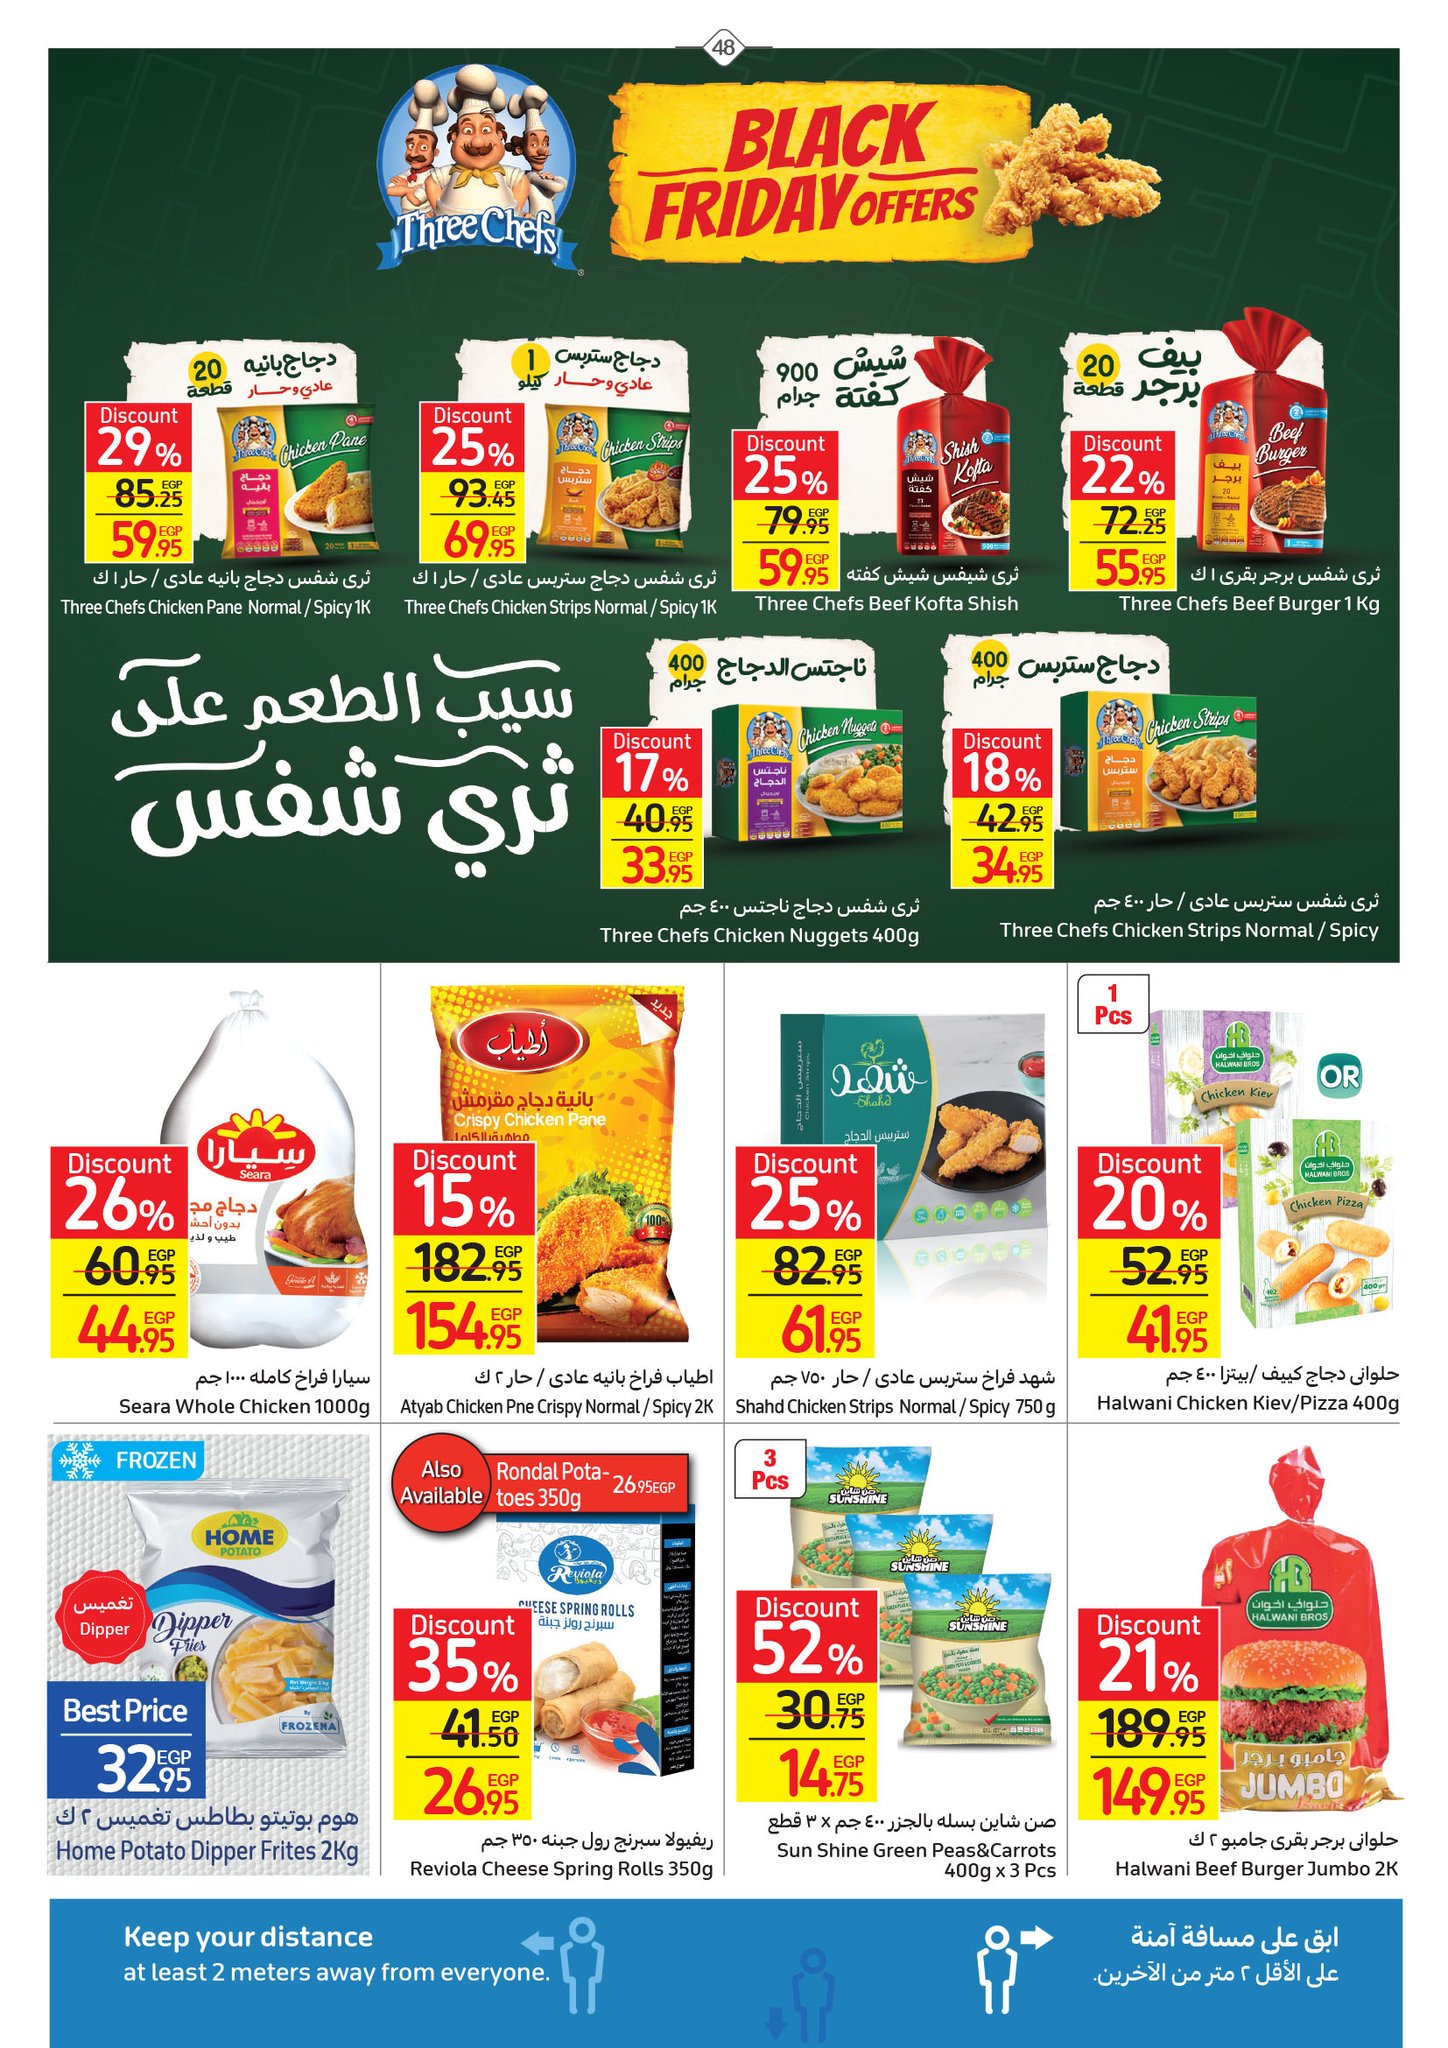 Watch the latest Carrefour half price offers "Last Chance Offer" until December 4th 48